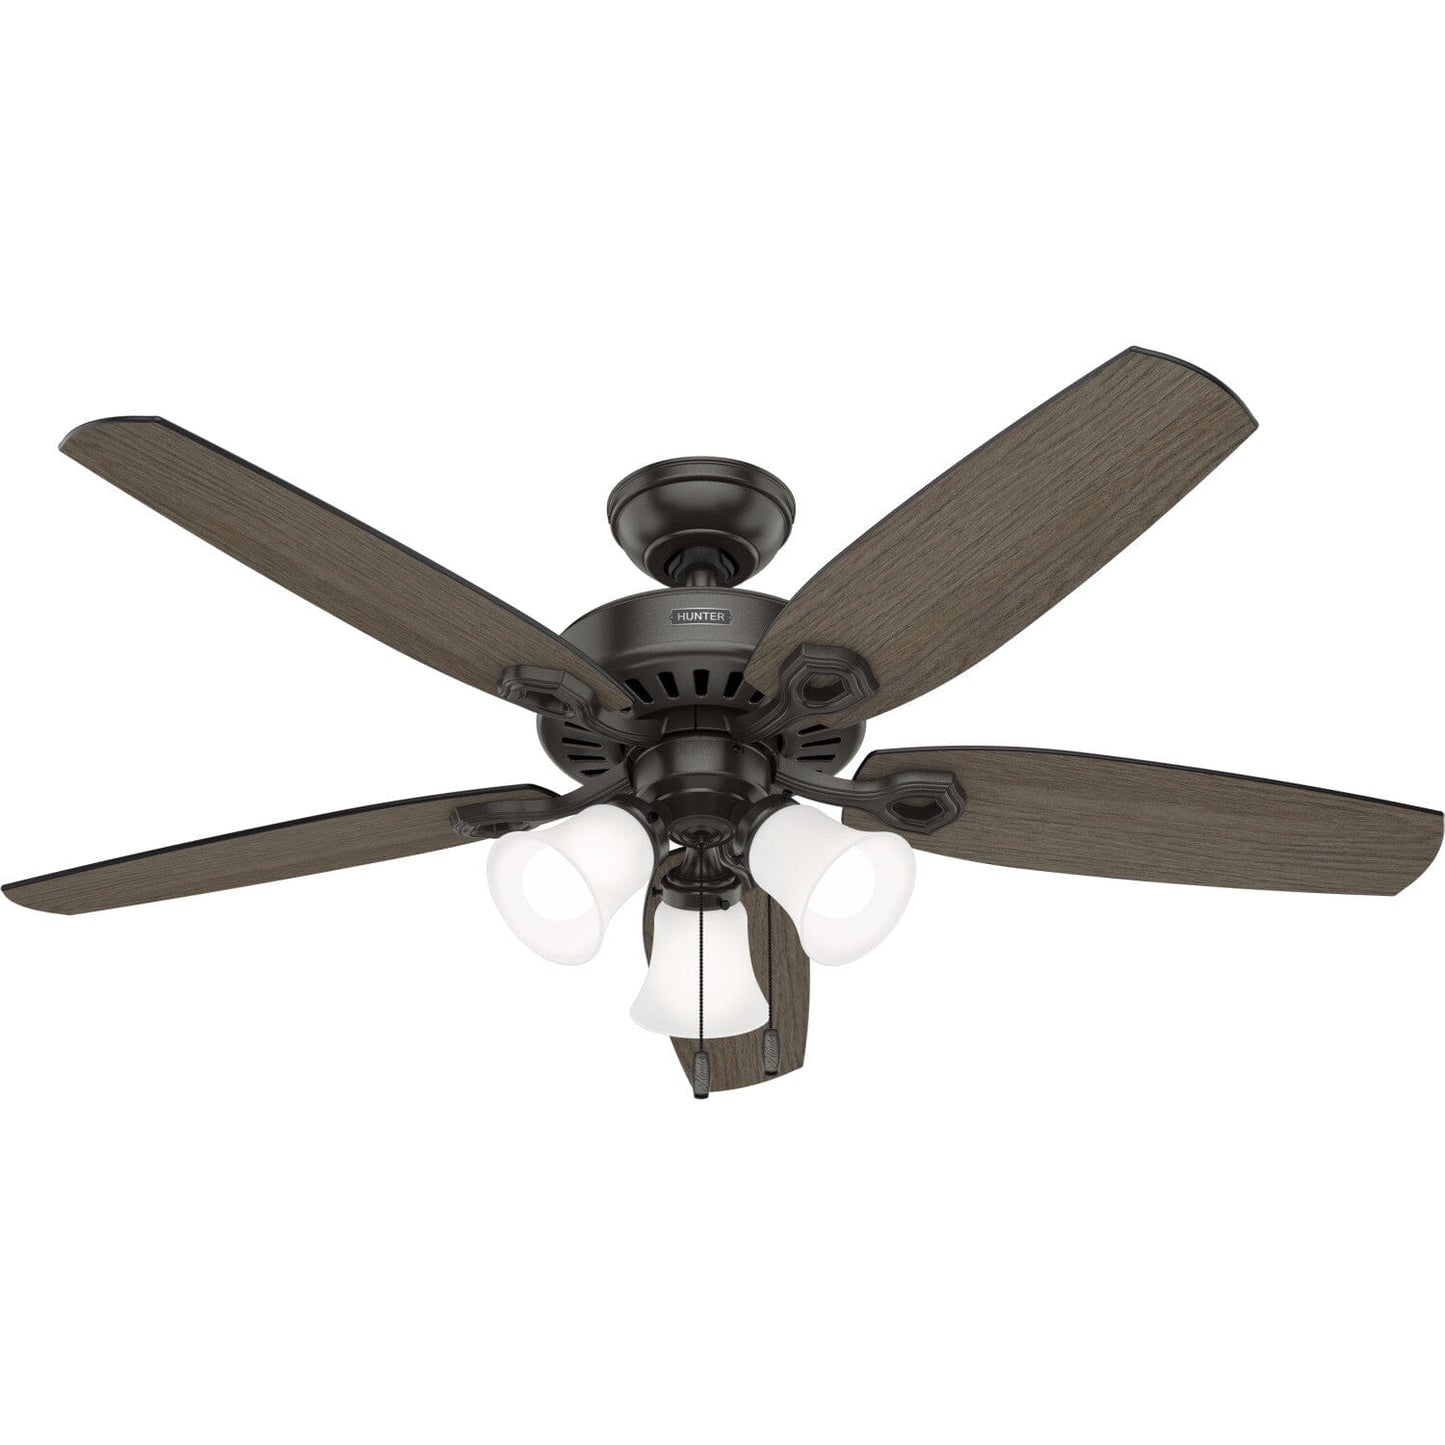 Builder ENERGY STAR DC with Light 52 inch Ceiling Fans Hunter Noble Bronze - Greyed Walnut 